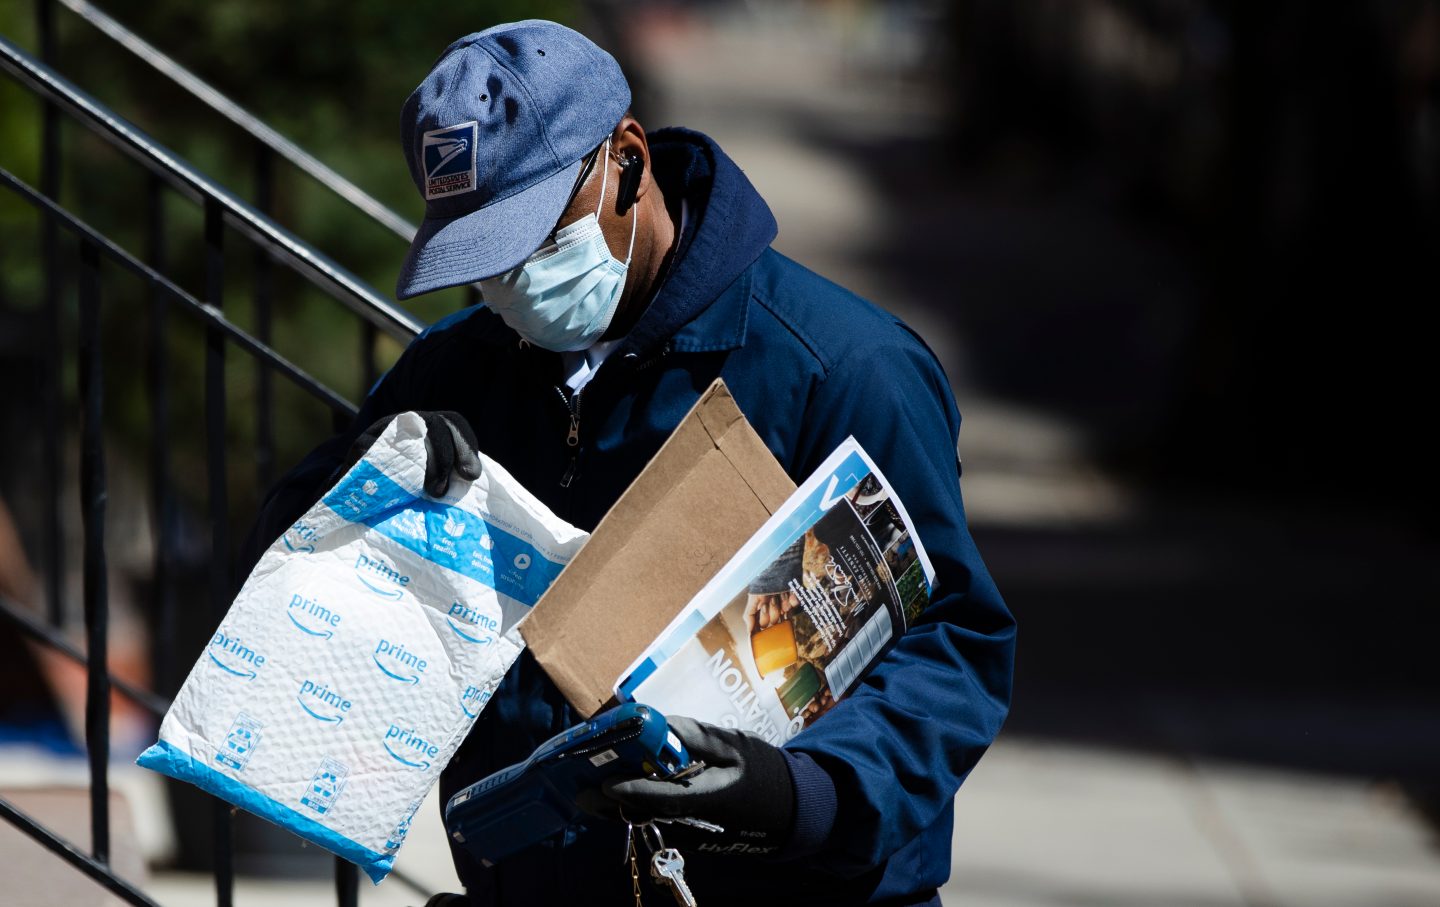 A postal worker making a delivery